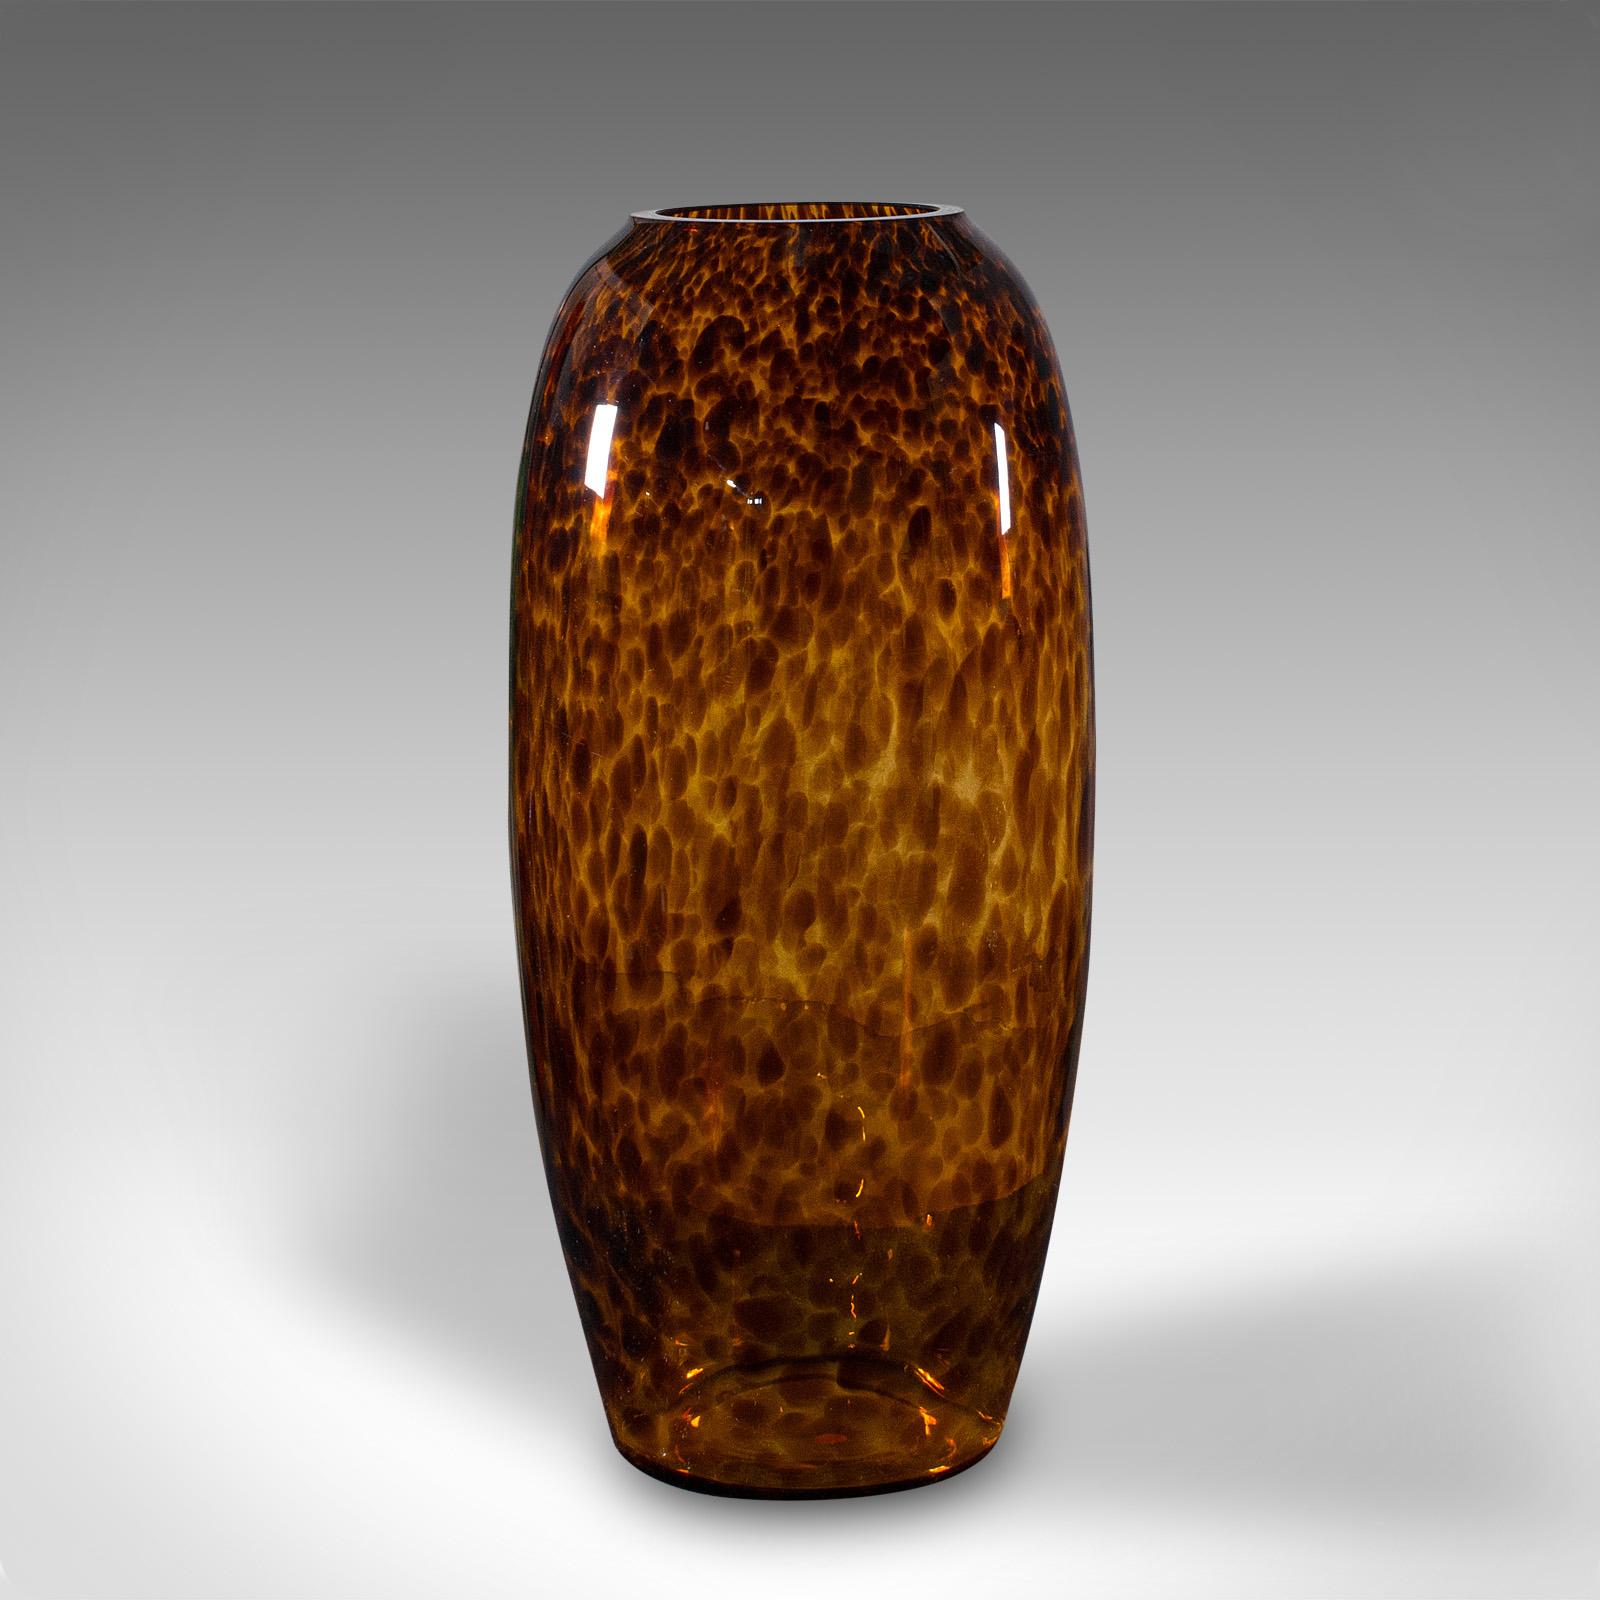 Tall Vintage Amber Vase, Italian, Art Glass, Flower Sleeve, Decorative, C.1970 In Good Condition For Sale In Hele, Devon, GB